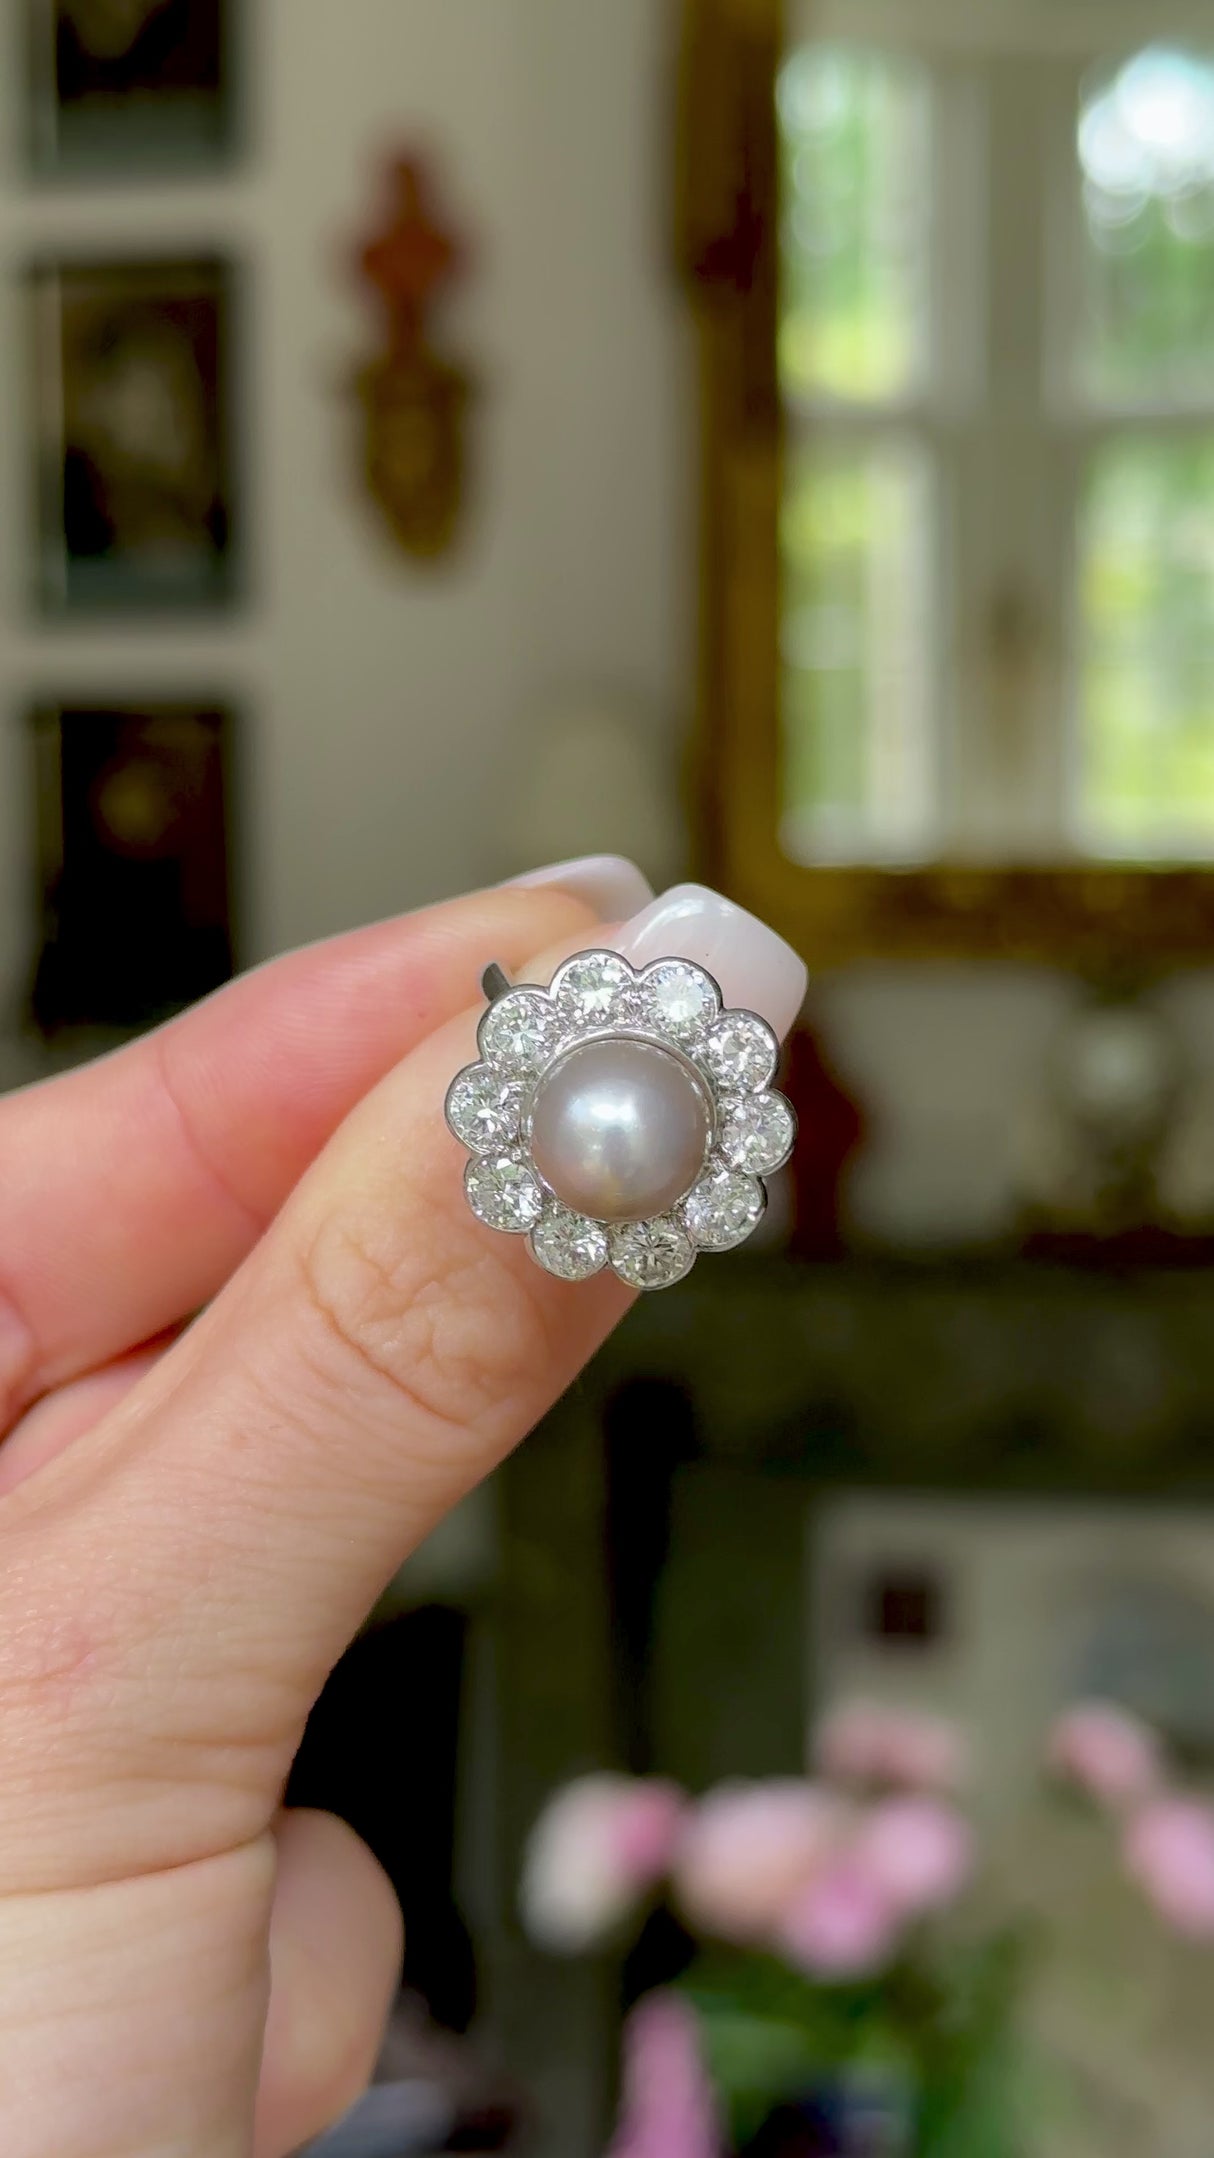 Antique natural pearl and diamond ring, worn on hand and rotated to give perspective. Antique natural pearl and diamond ring, held in fingers and rotated to give perspective. 